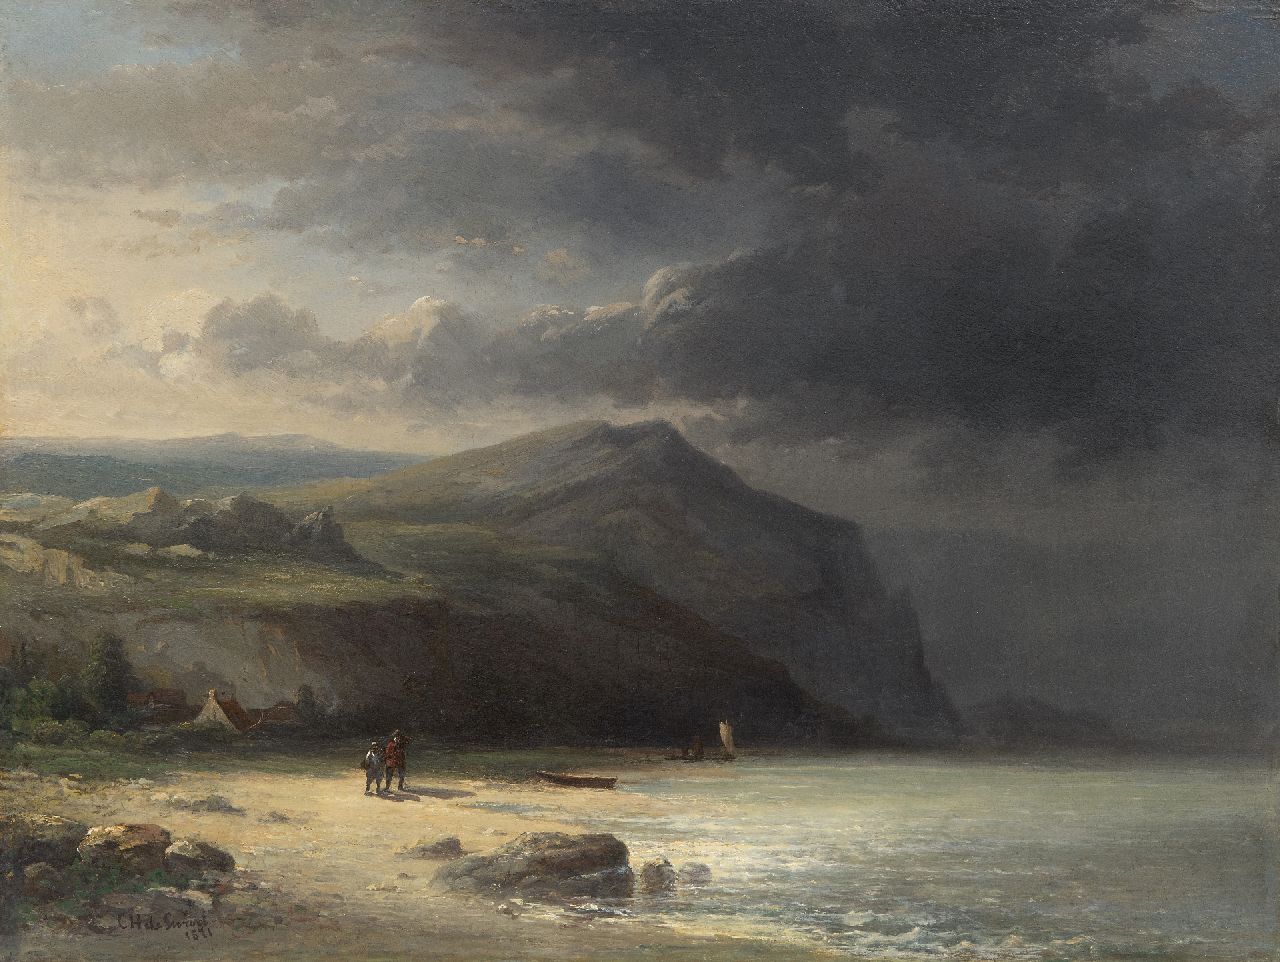 Swart C.H. de | Corstiaan Hendrikus de Swart | Paintings offered for sale | Land folk on the beach with approaching storm, oil on panel 45.3 x 59.7 cm, signed l.l. and dated 1871